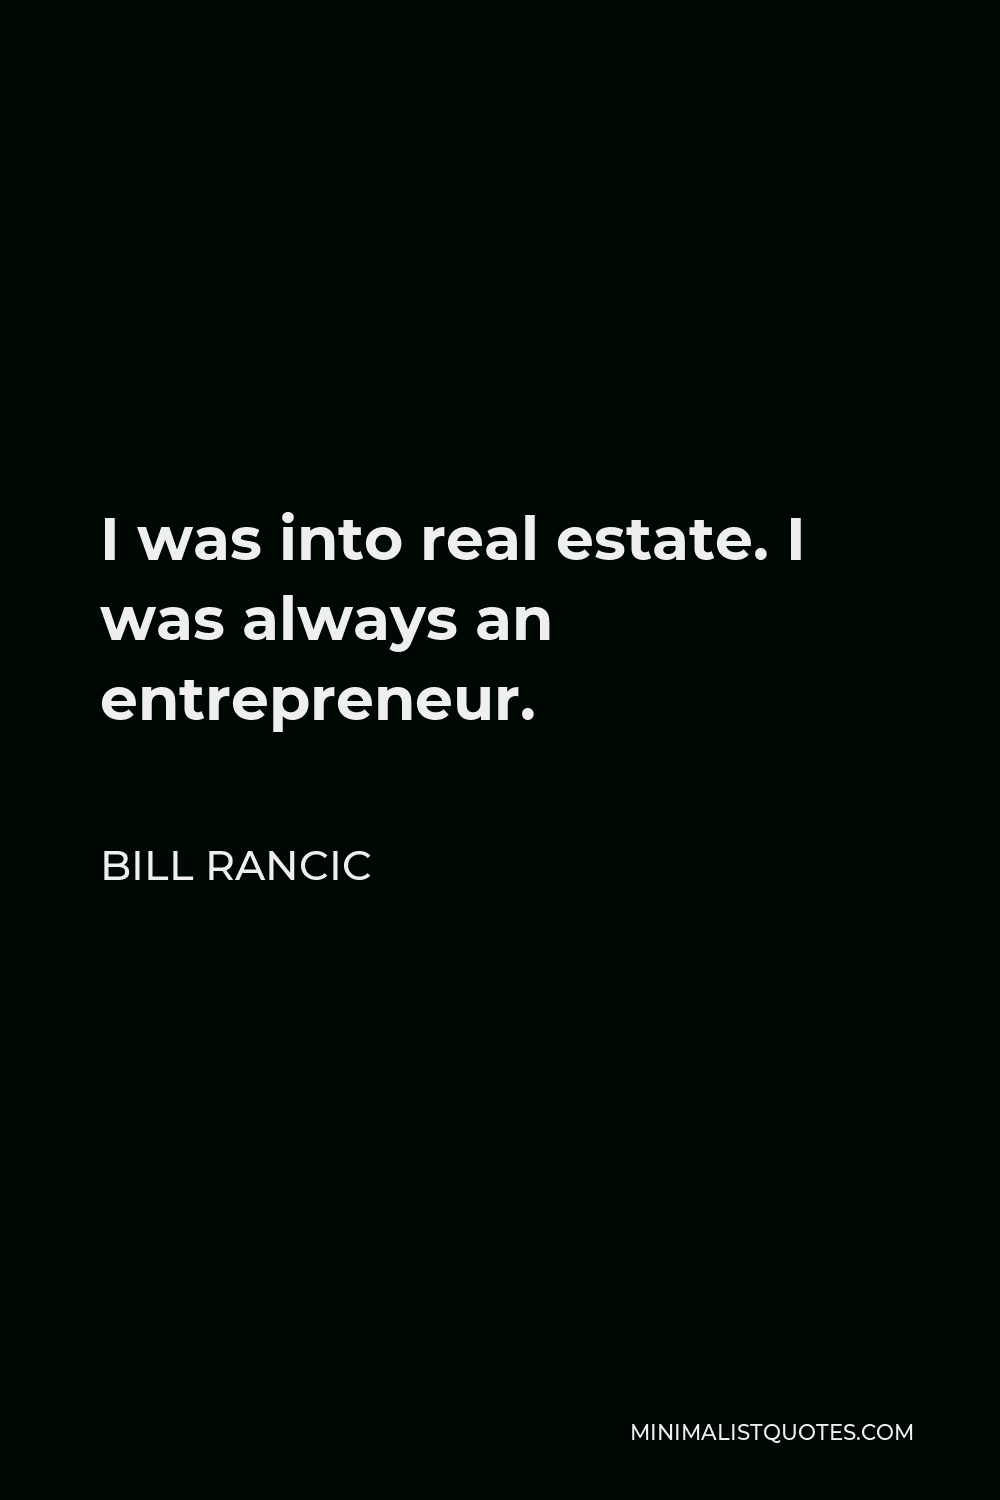 Bill Rancic Quote - I was into real estate. I was always an entrepreneur.